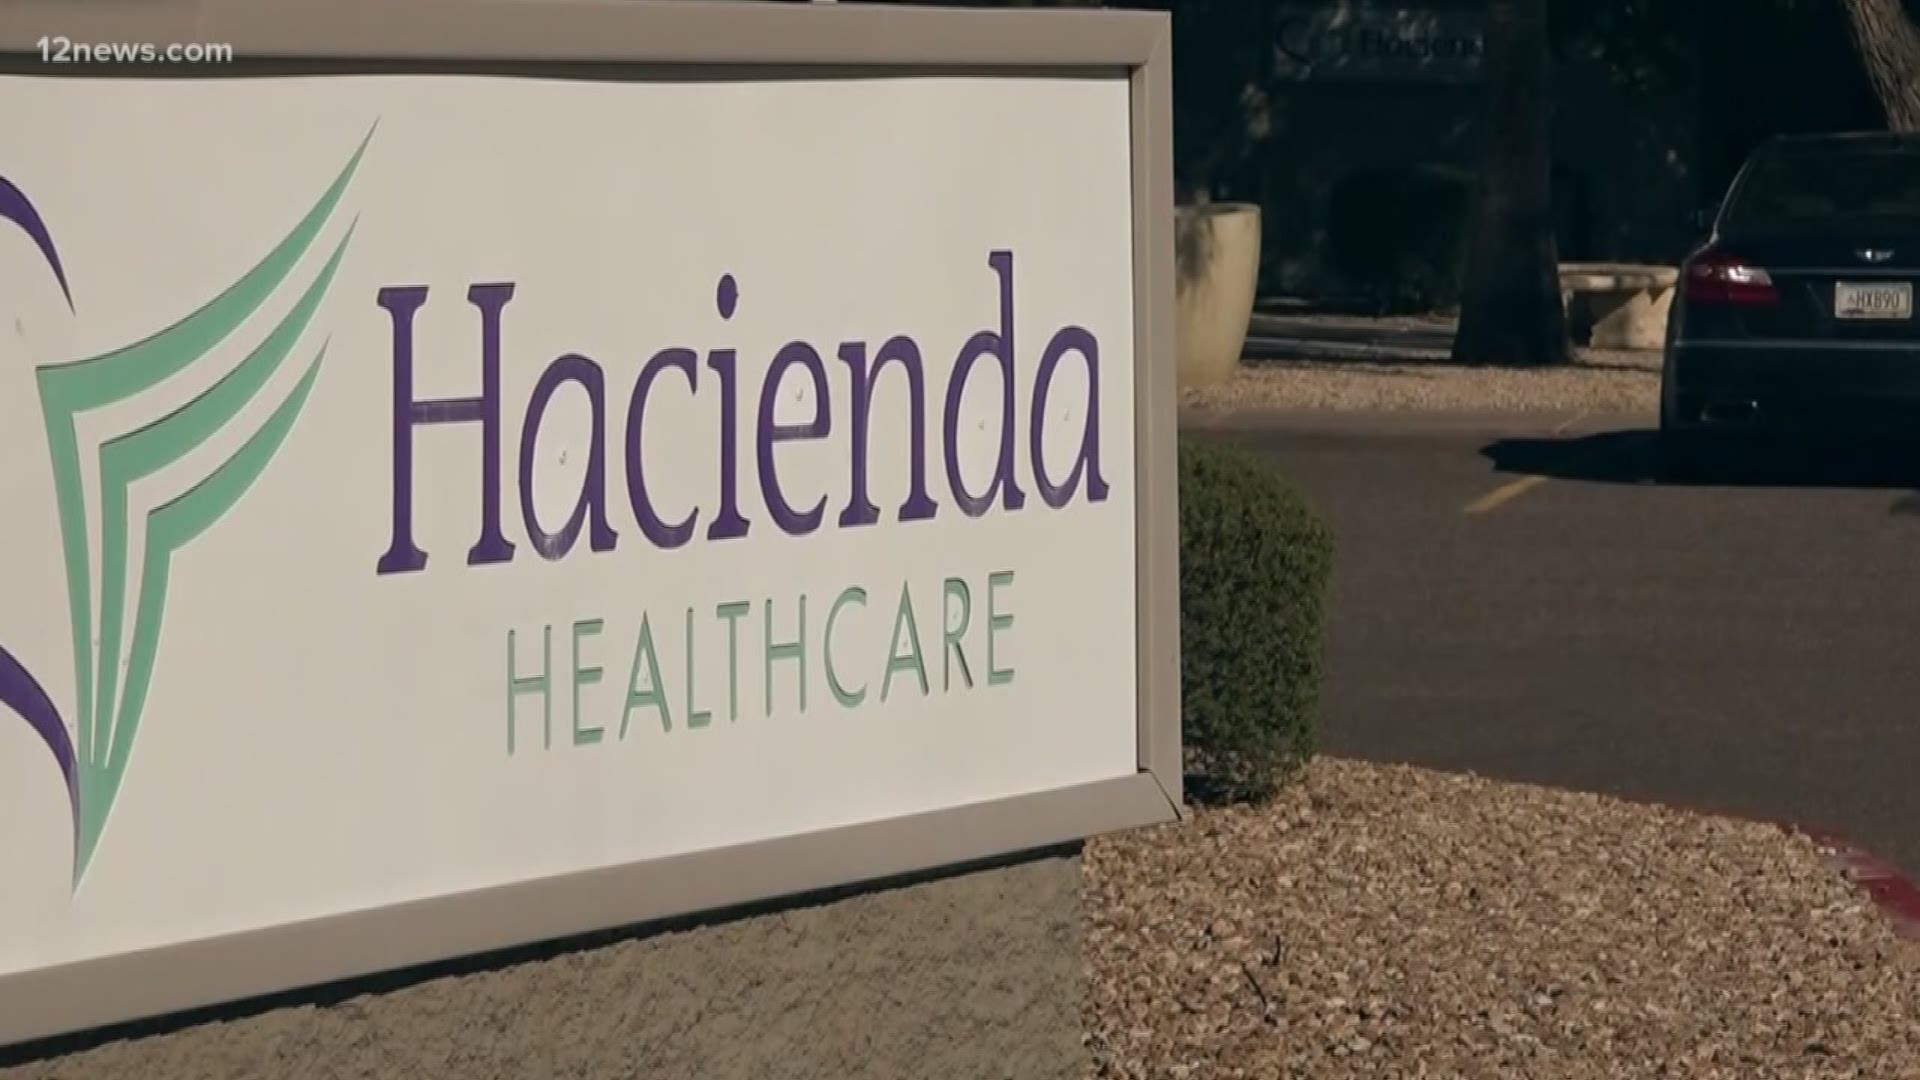 Hacienda Healthcare had a special license, but not through the Arizona government. Oversight for the facility came from the federal government.